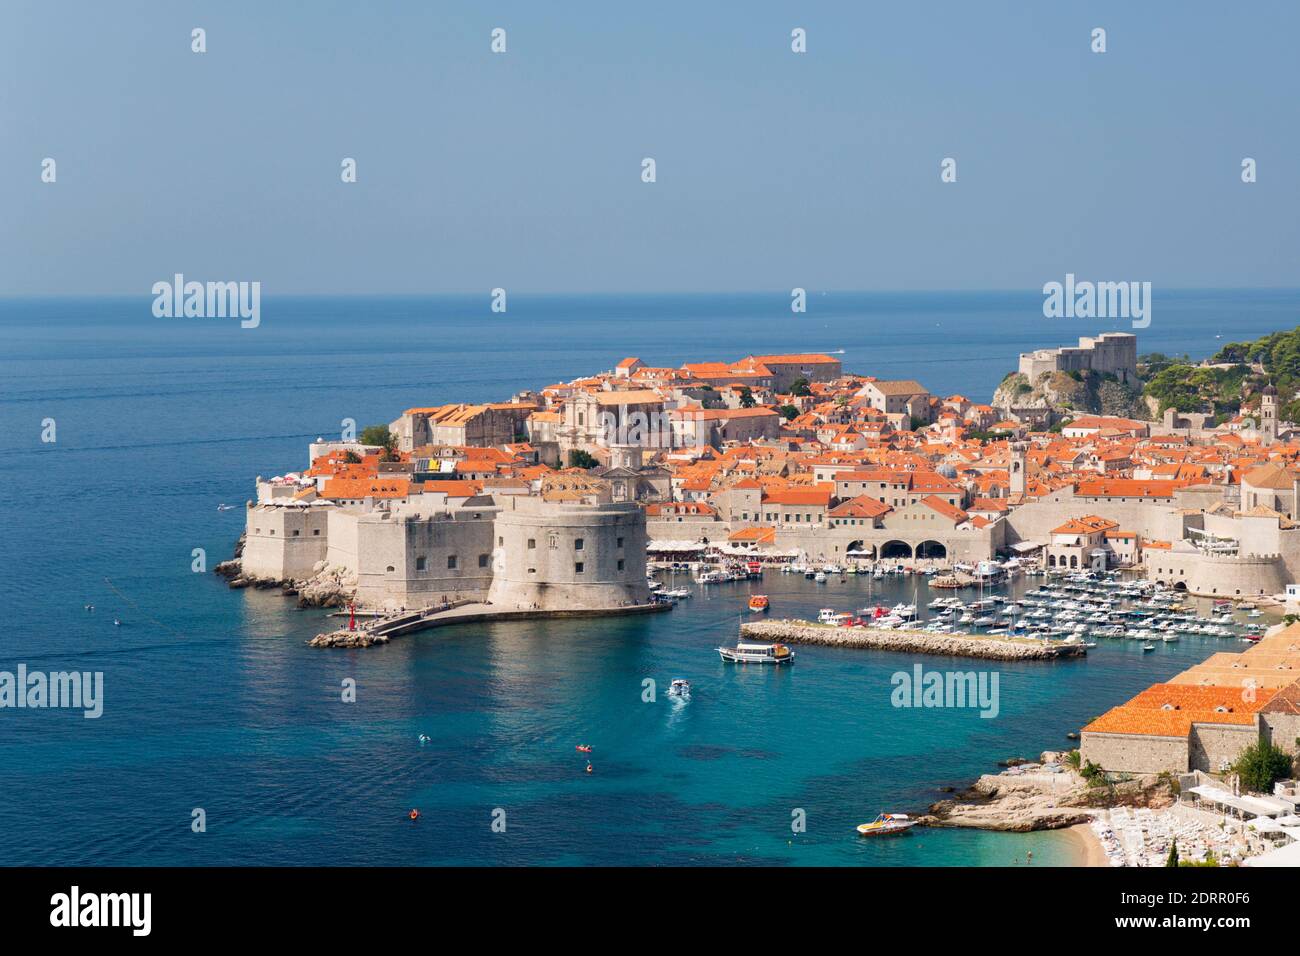 Dubrovnik, Dubrovnik-Neretva, Croatia. View over the Old Town from hillside above the Adriatic Sea. Stock Photo